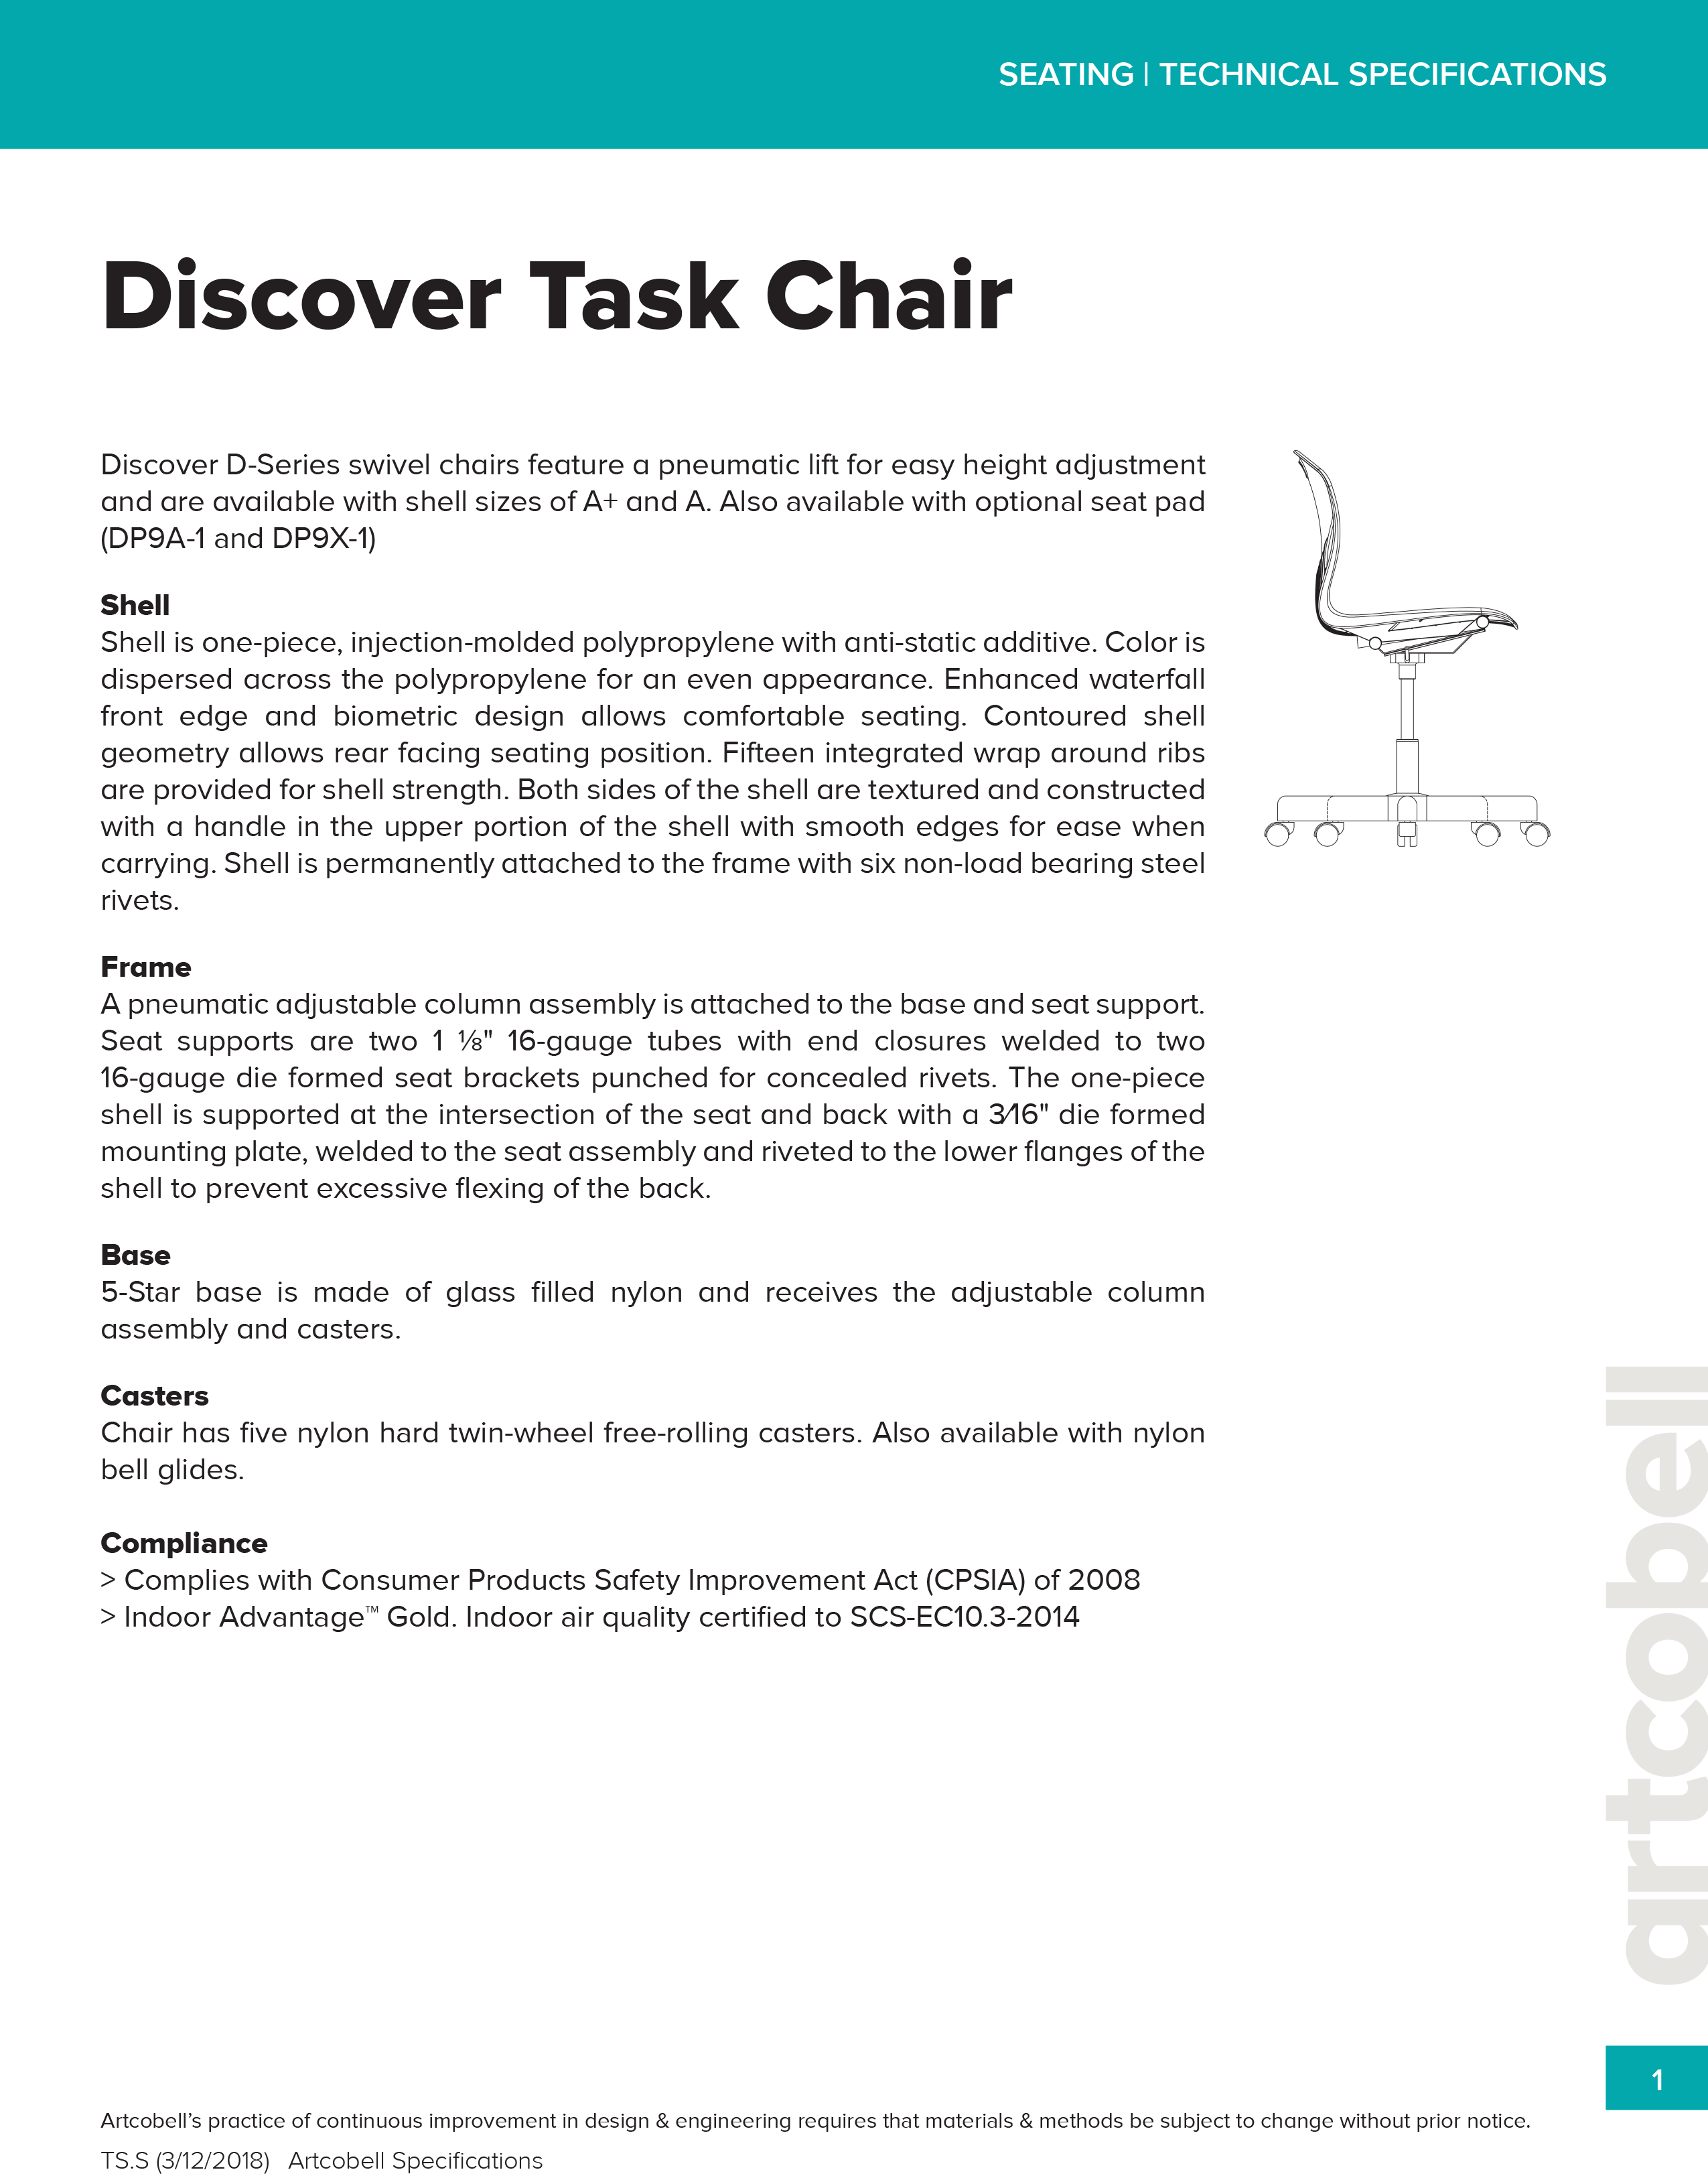 SeatingSpecifications_DiscoverTaskChair